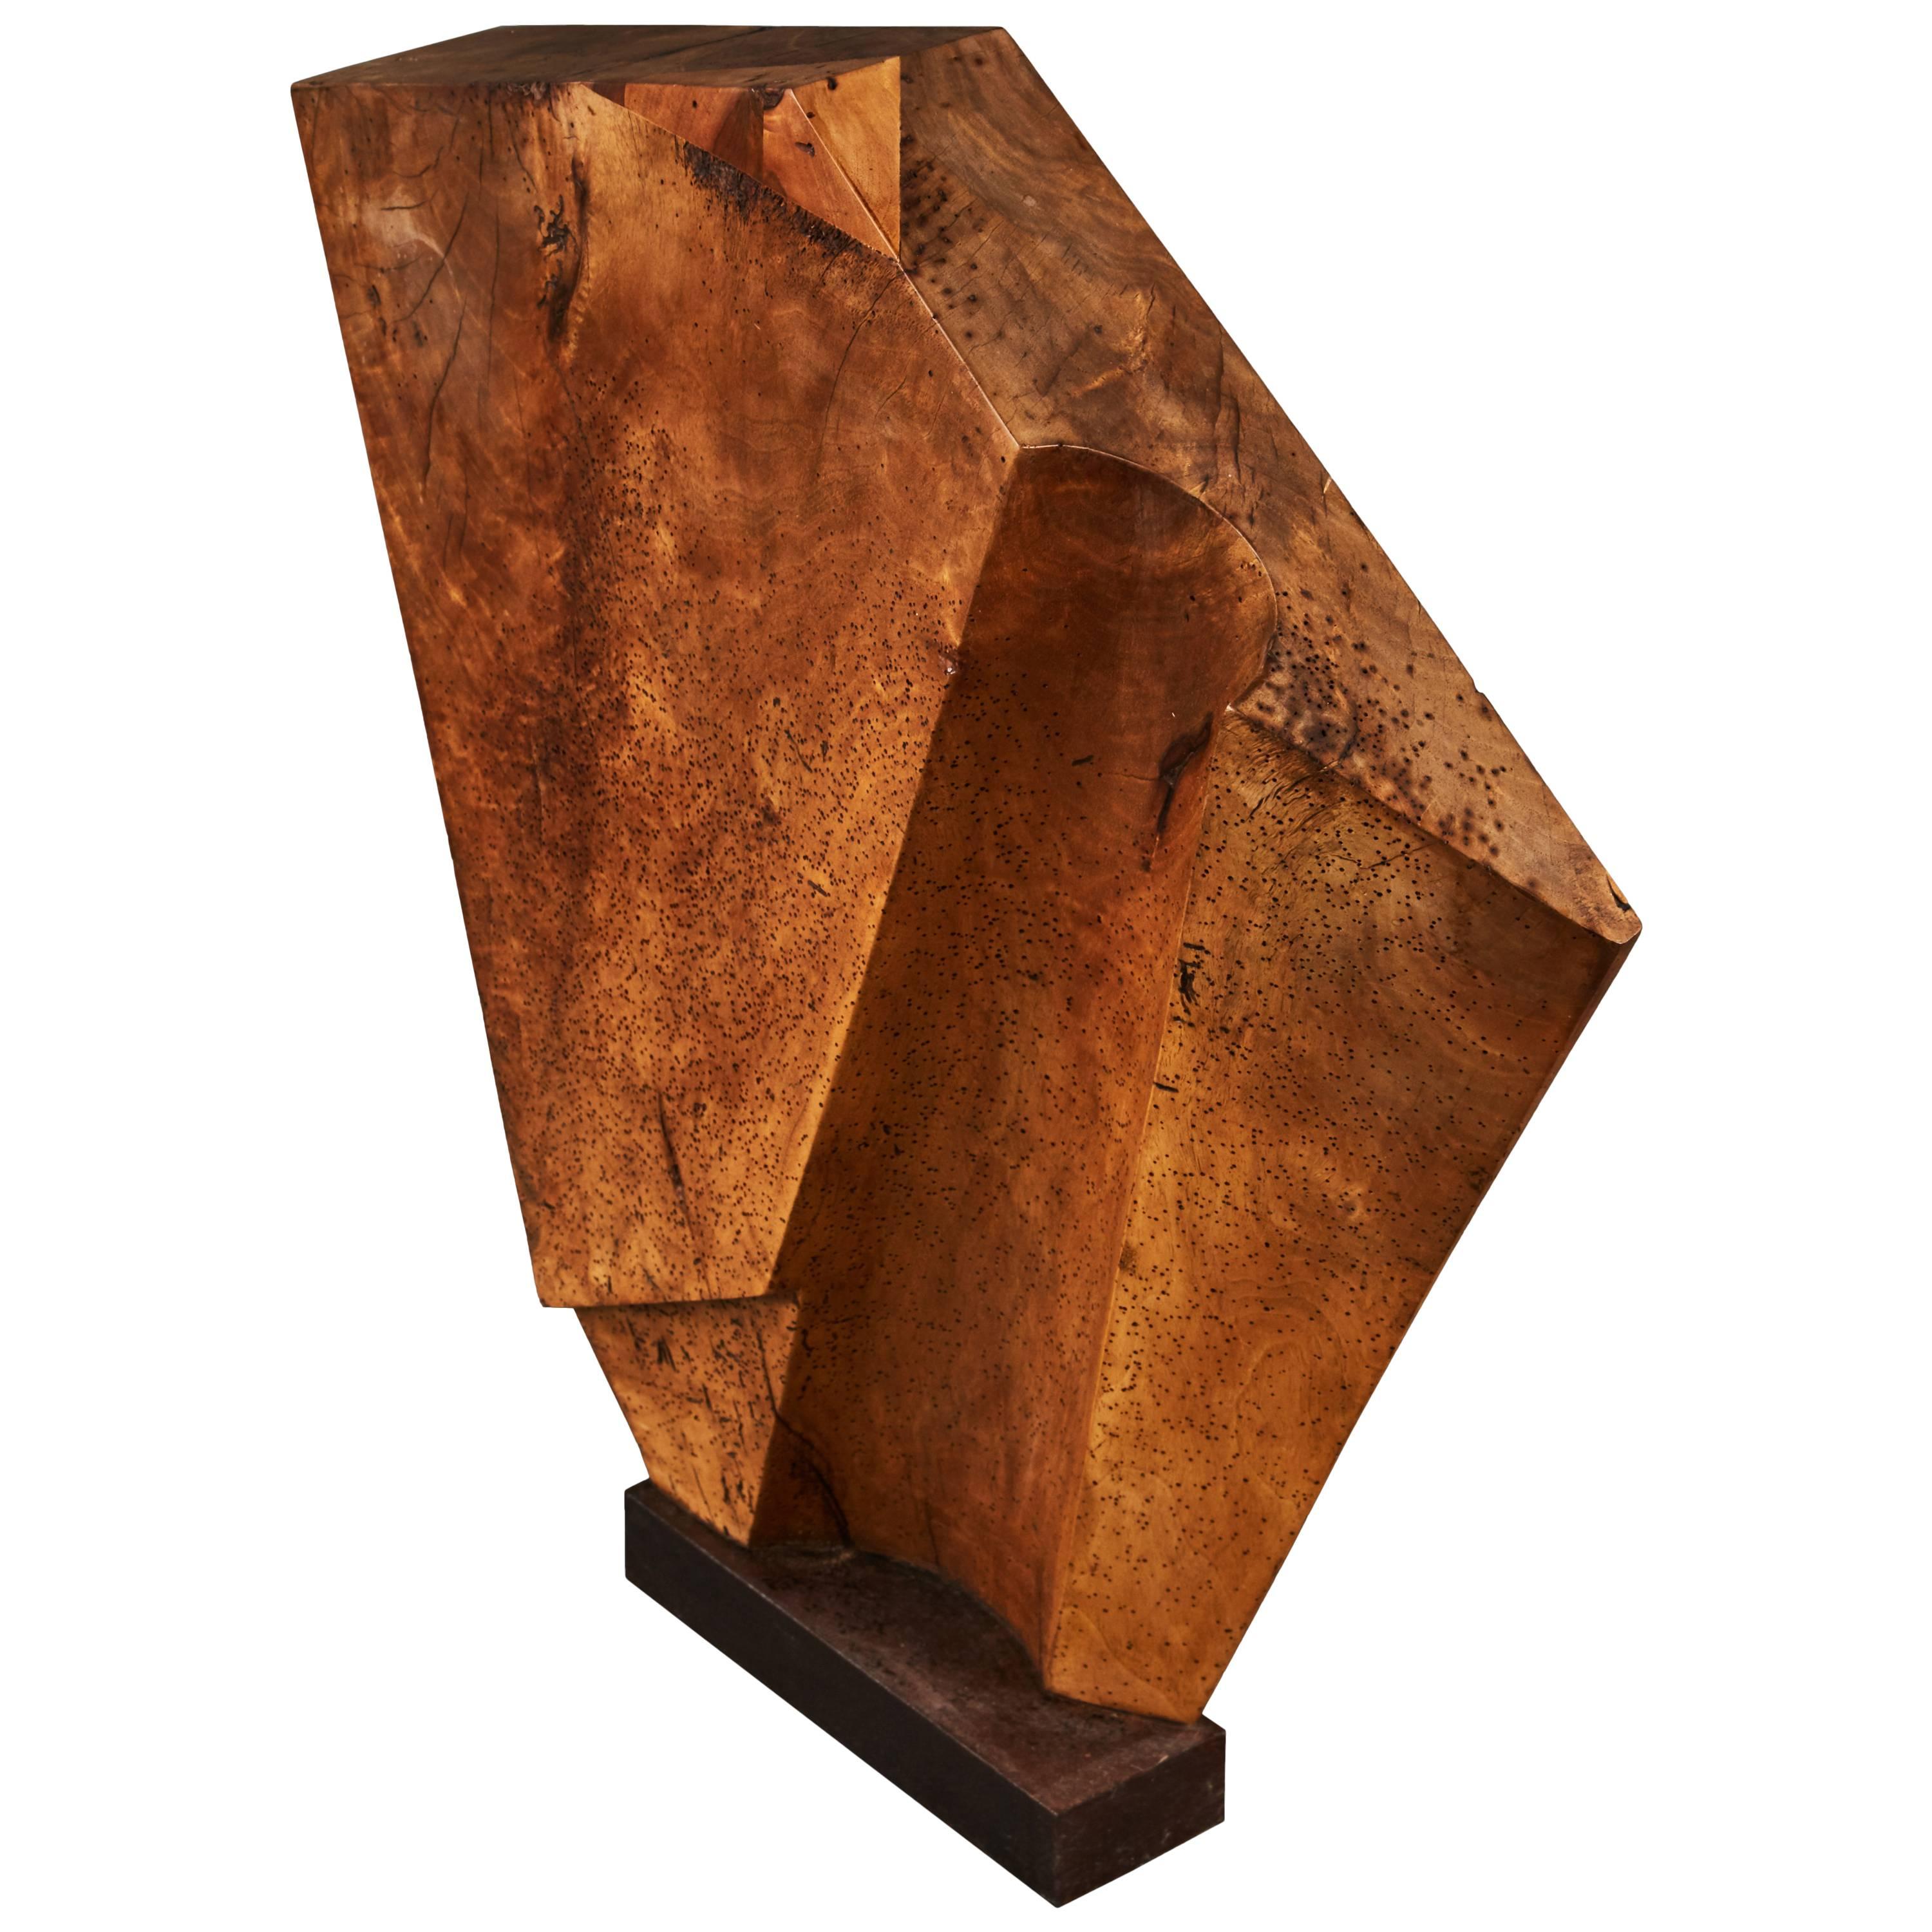 Striking Wood Sculpture Mounted on a Metal Base For Sale